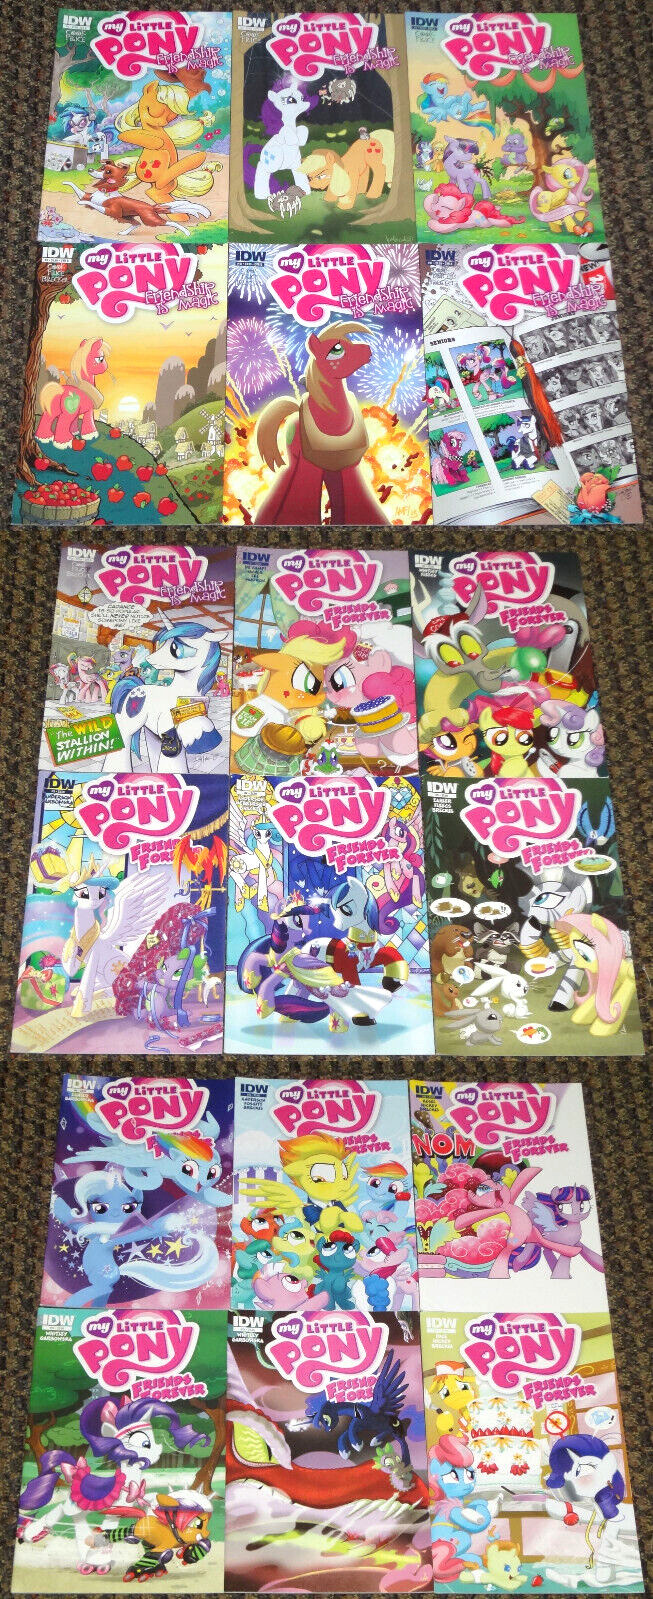 IDW COMICS MY LITTLE PONY FRIENDSHIP IS MAGIC 1-4 9-12 FRIENDS FOREVER 1-6 11-14